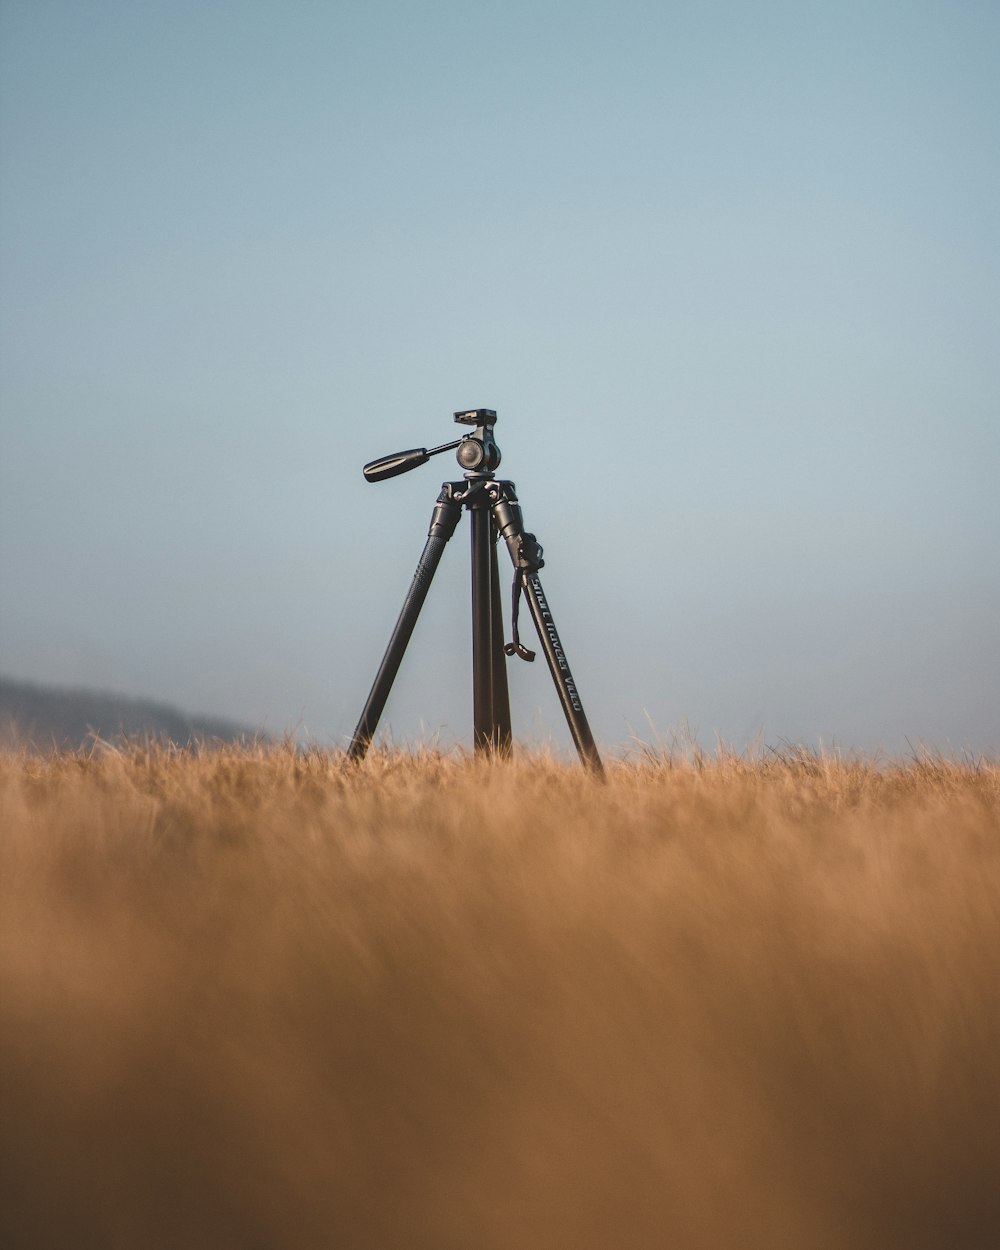 black camera on tripod on brown grass field during daytime